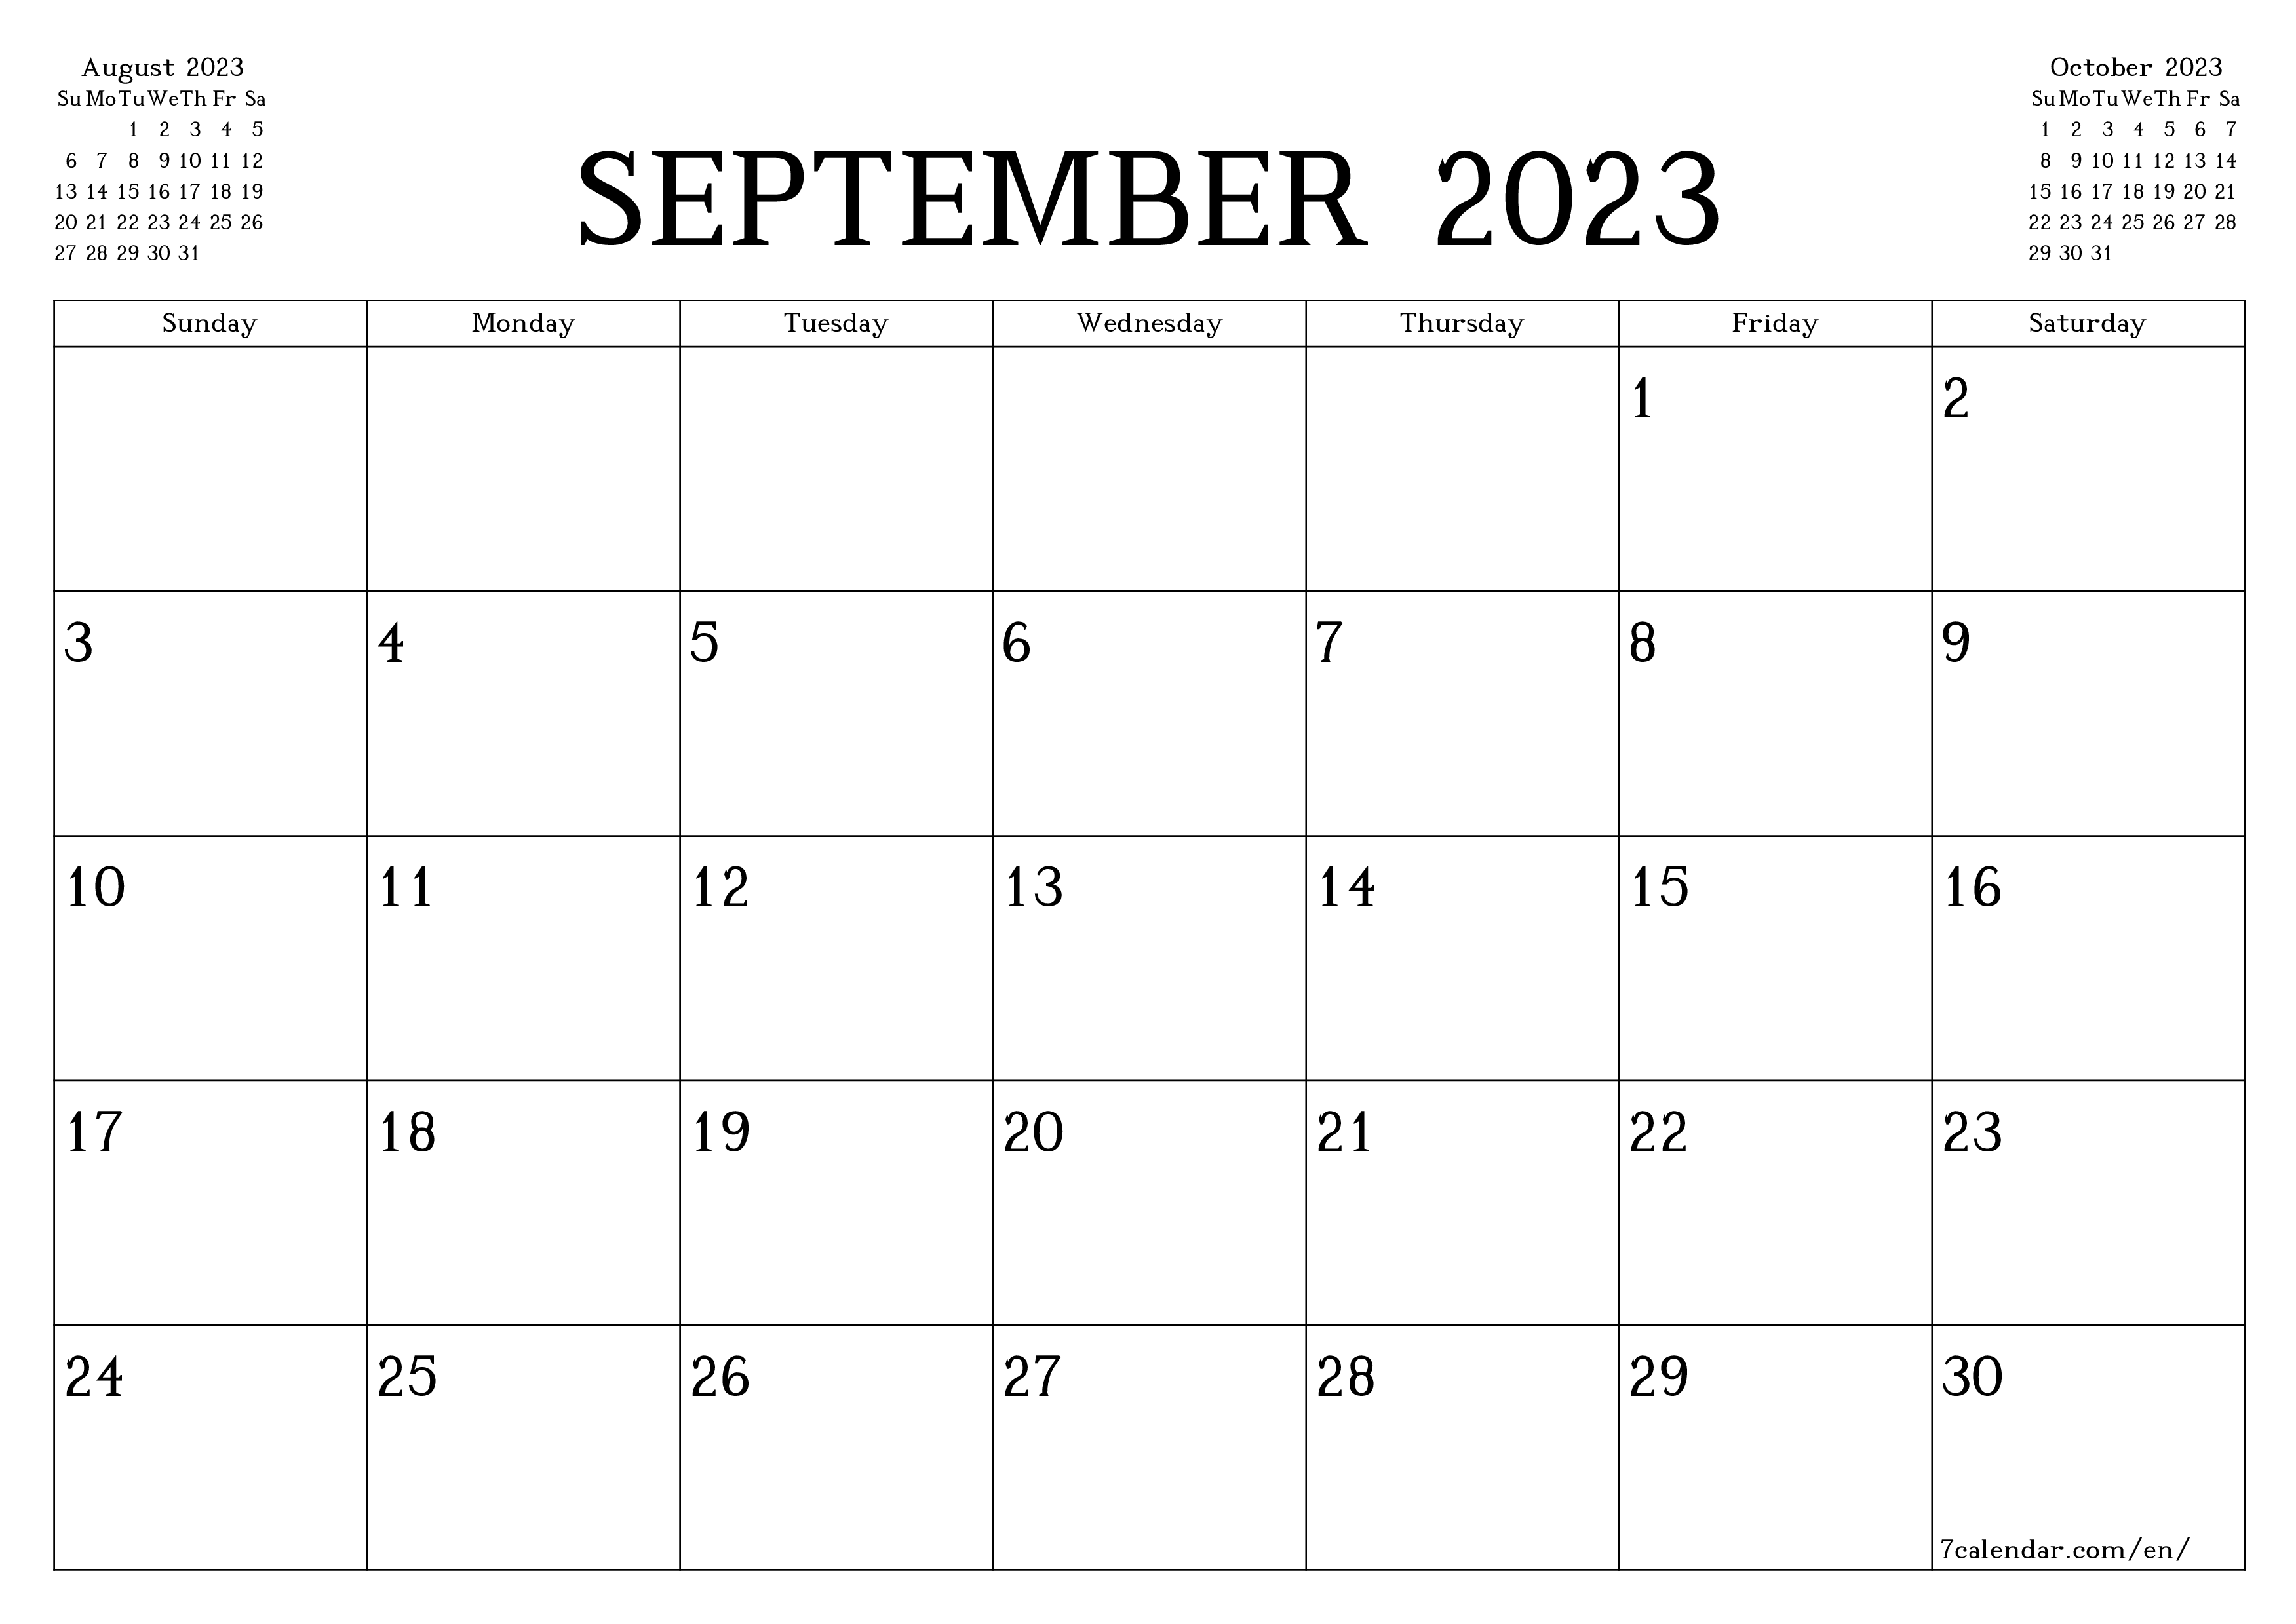 Blank monthly printable calendar and planner for month September 2023 with notes save and print to PDF PNG English - 7calendar.com